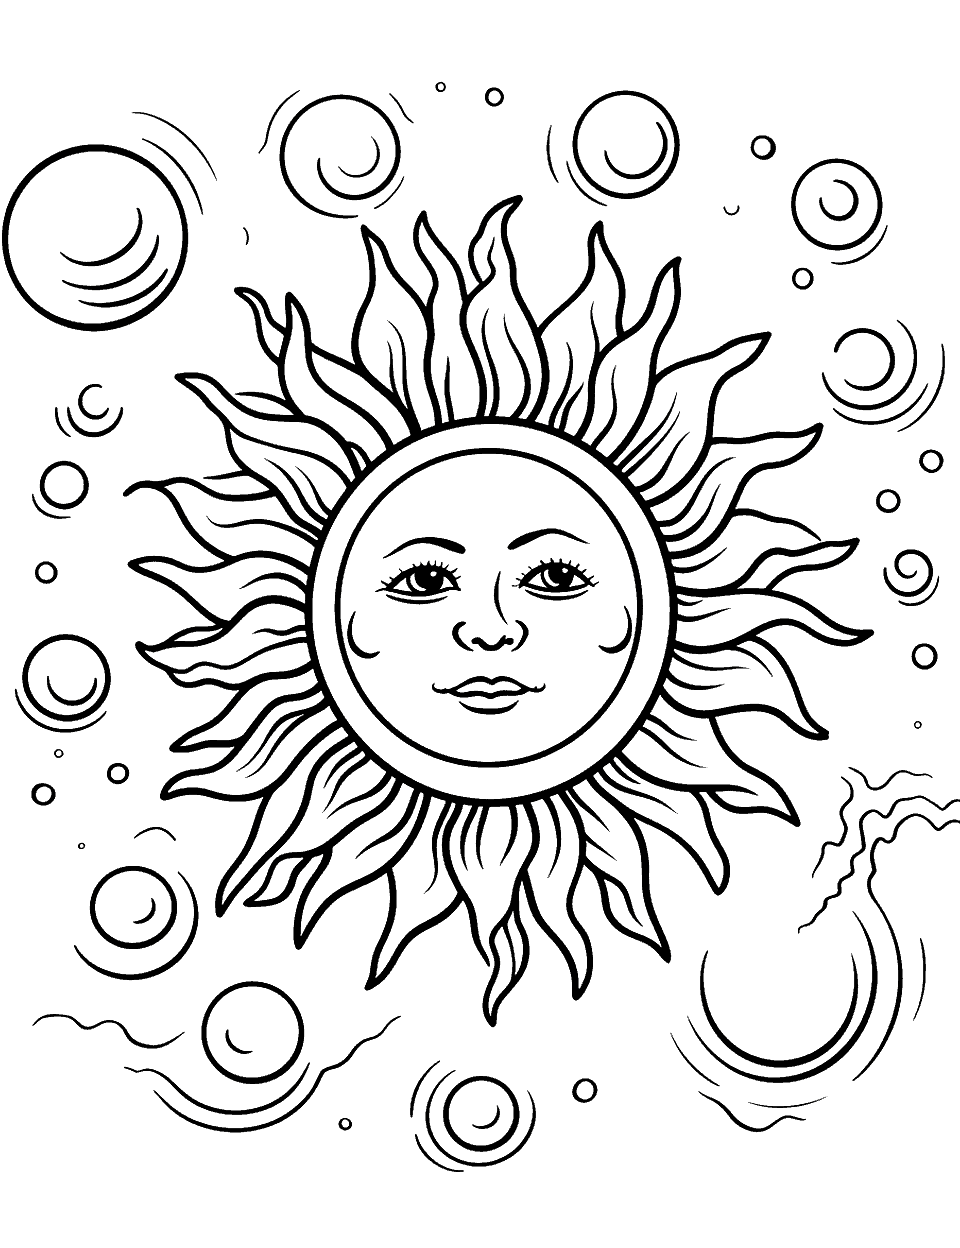 Sun's Fiery Surface Solar System Coloring Page - The sun with a face and its flames and solar flares.